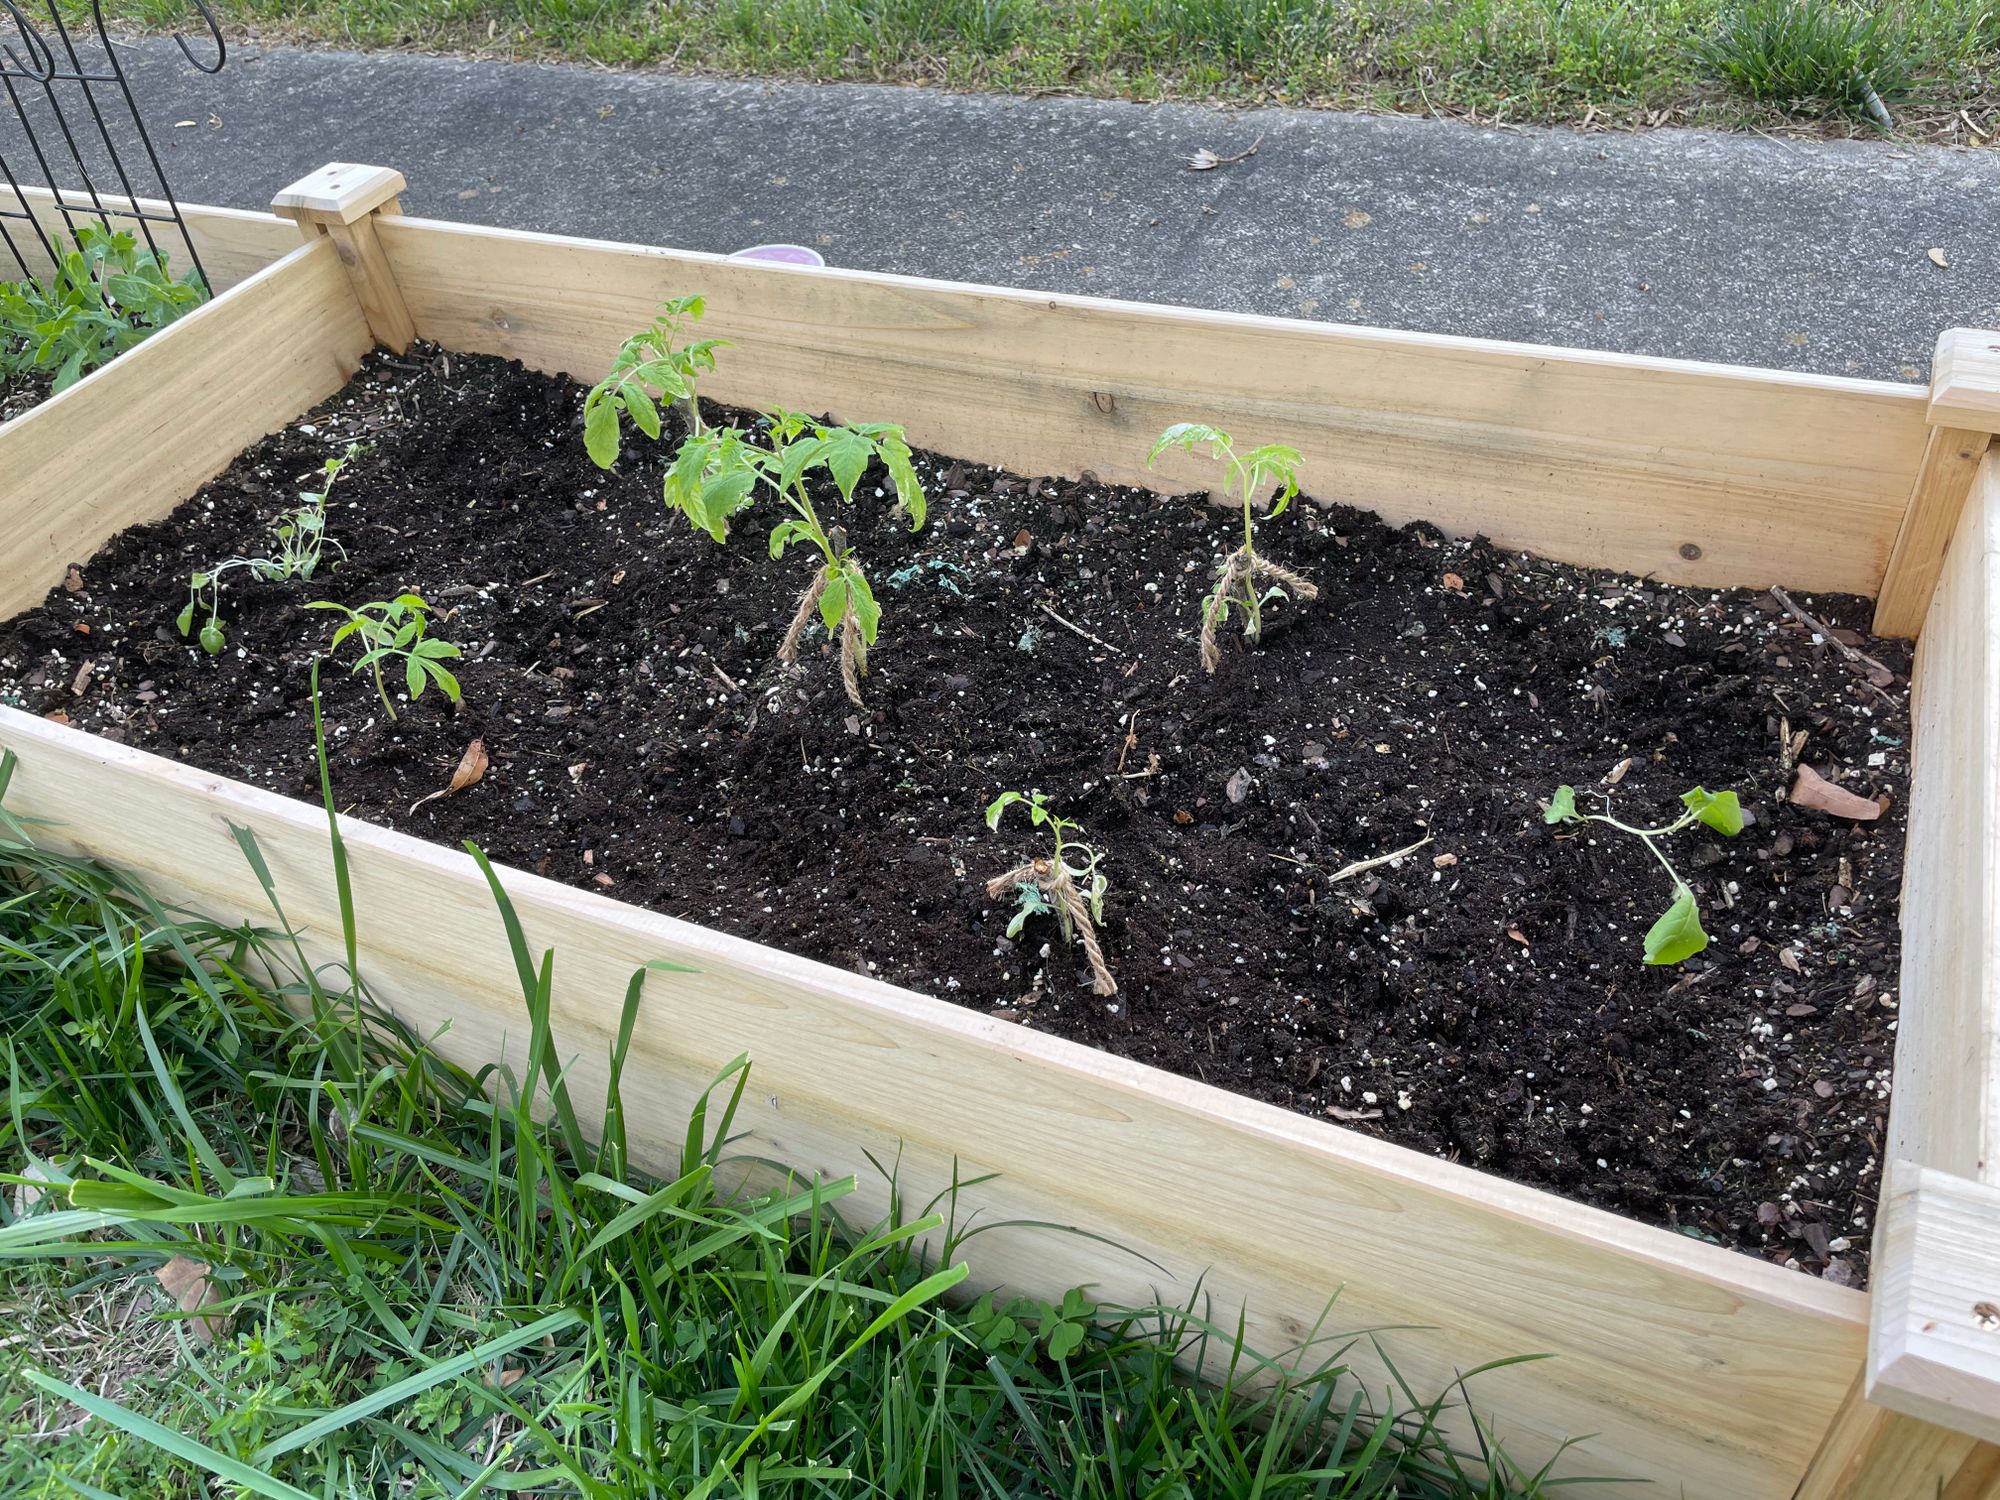 Two broccoli plants on either end of a raised garden bed with five tomato plants arranged in the middle.